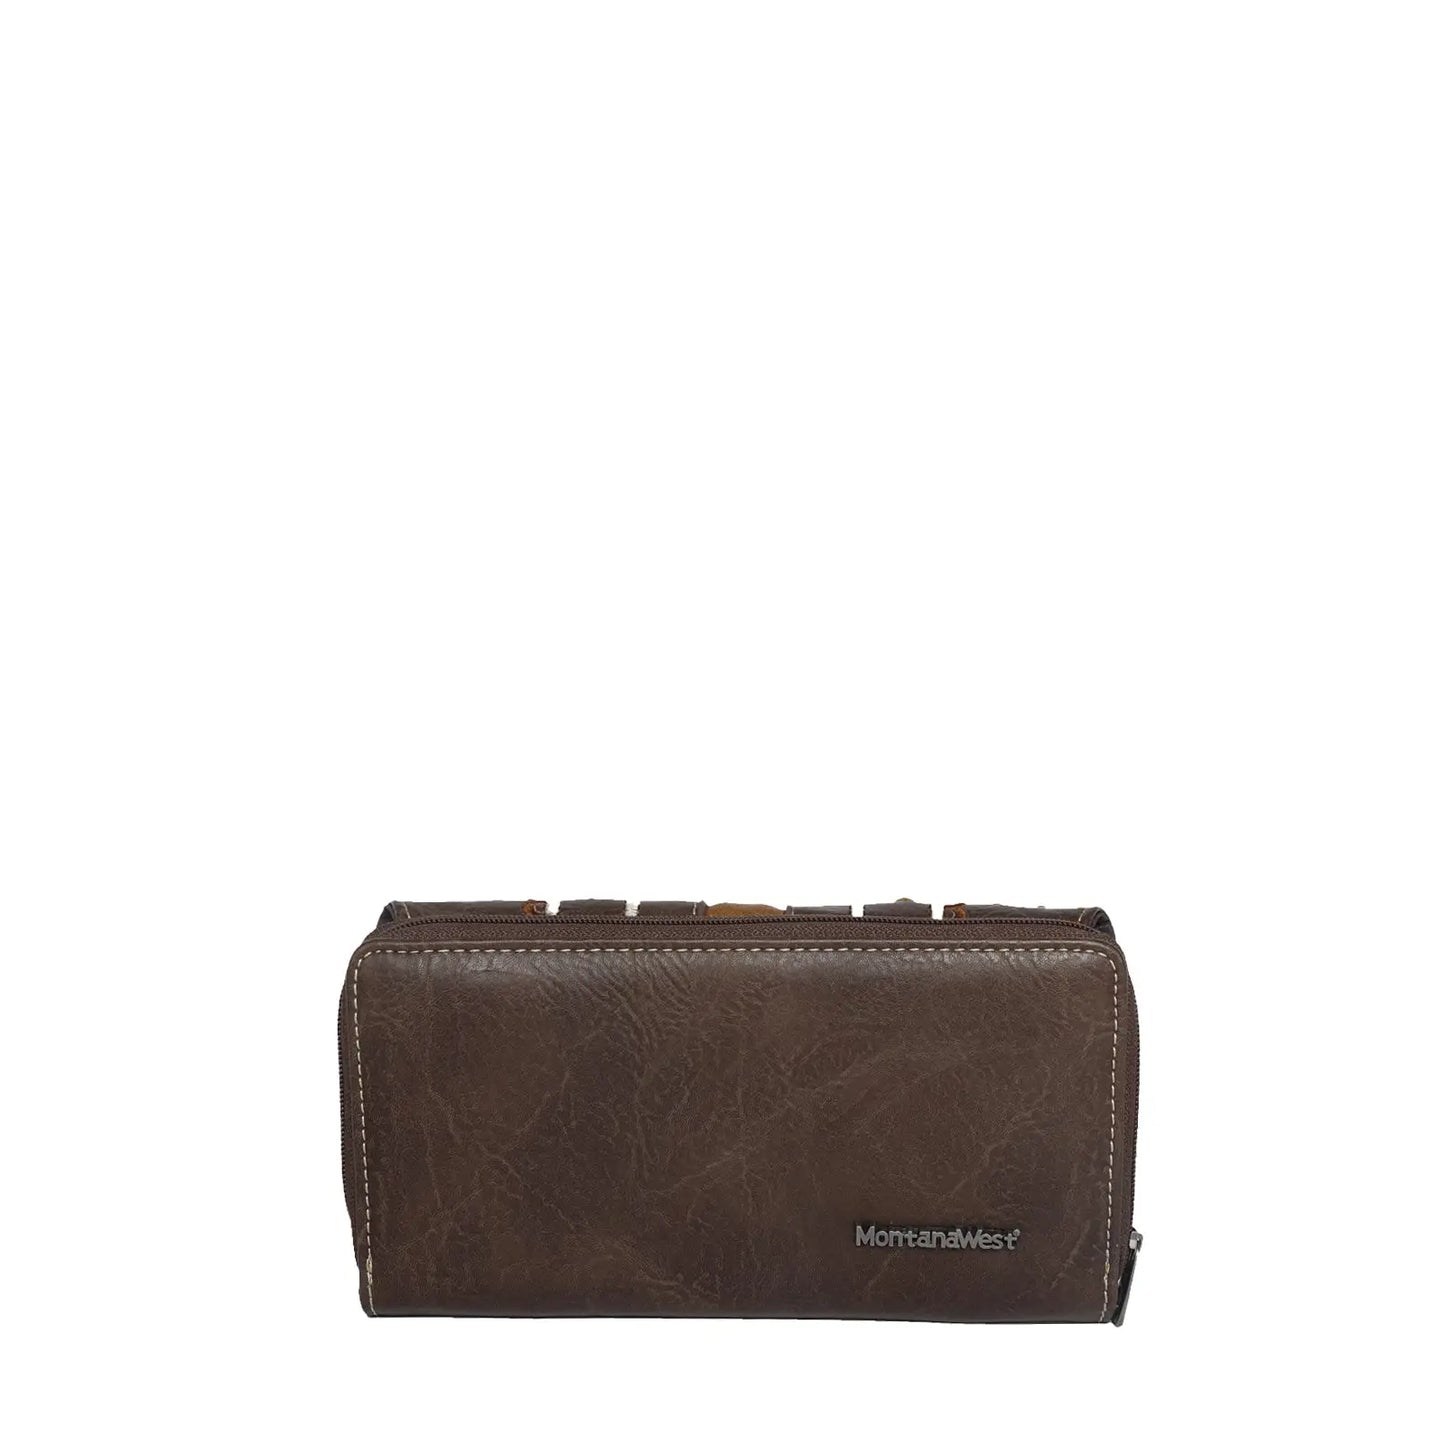 Montana West Studs Collection Wallet